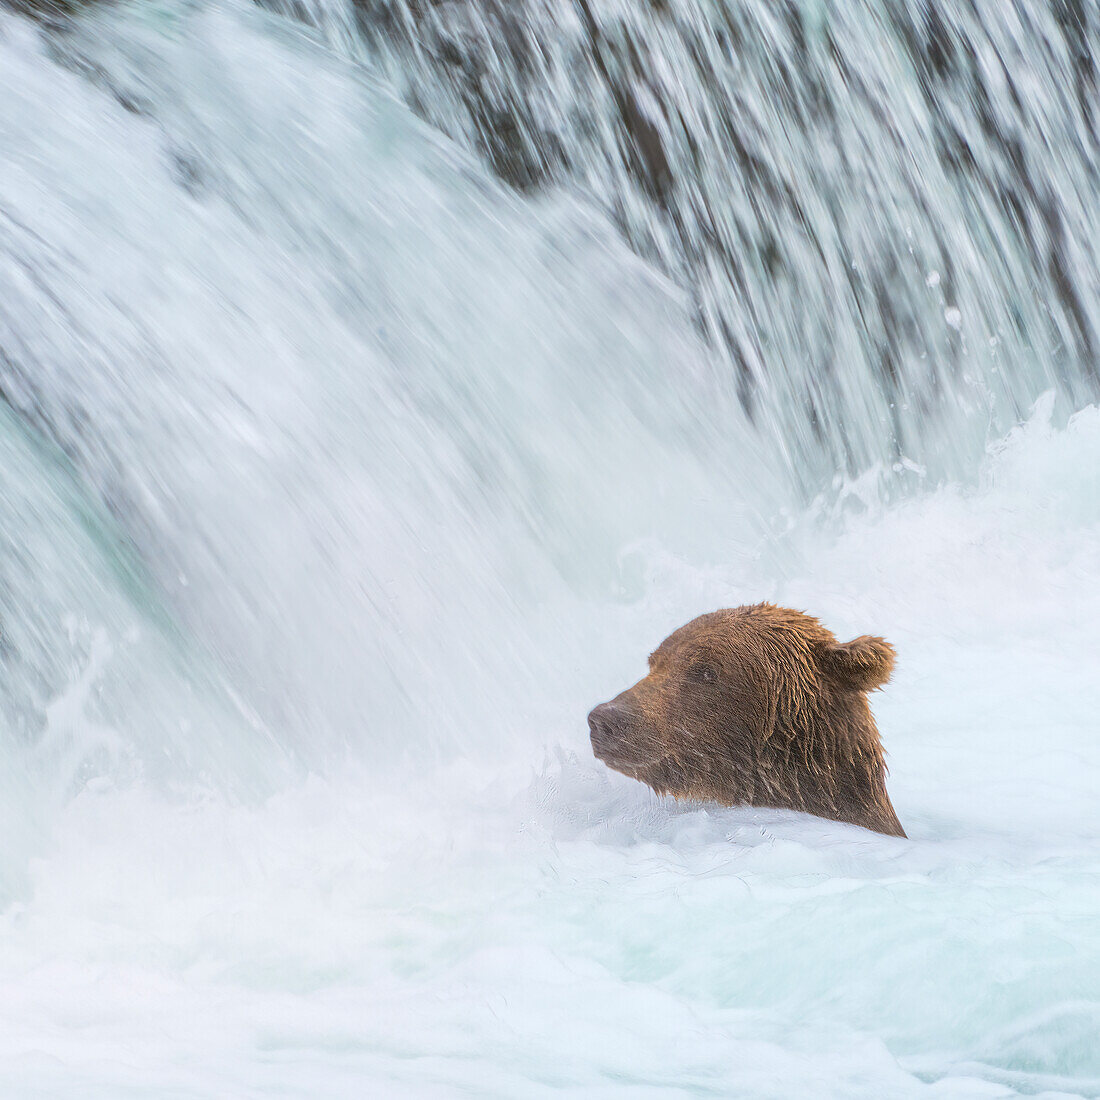 Alaska, Brooks Falls. Grizzly bear swims at the base of the falls.